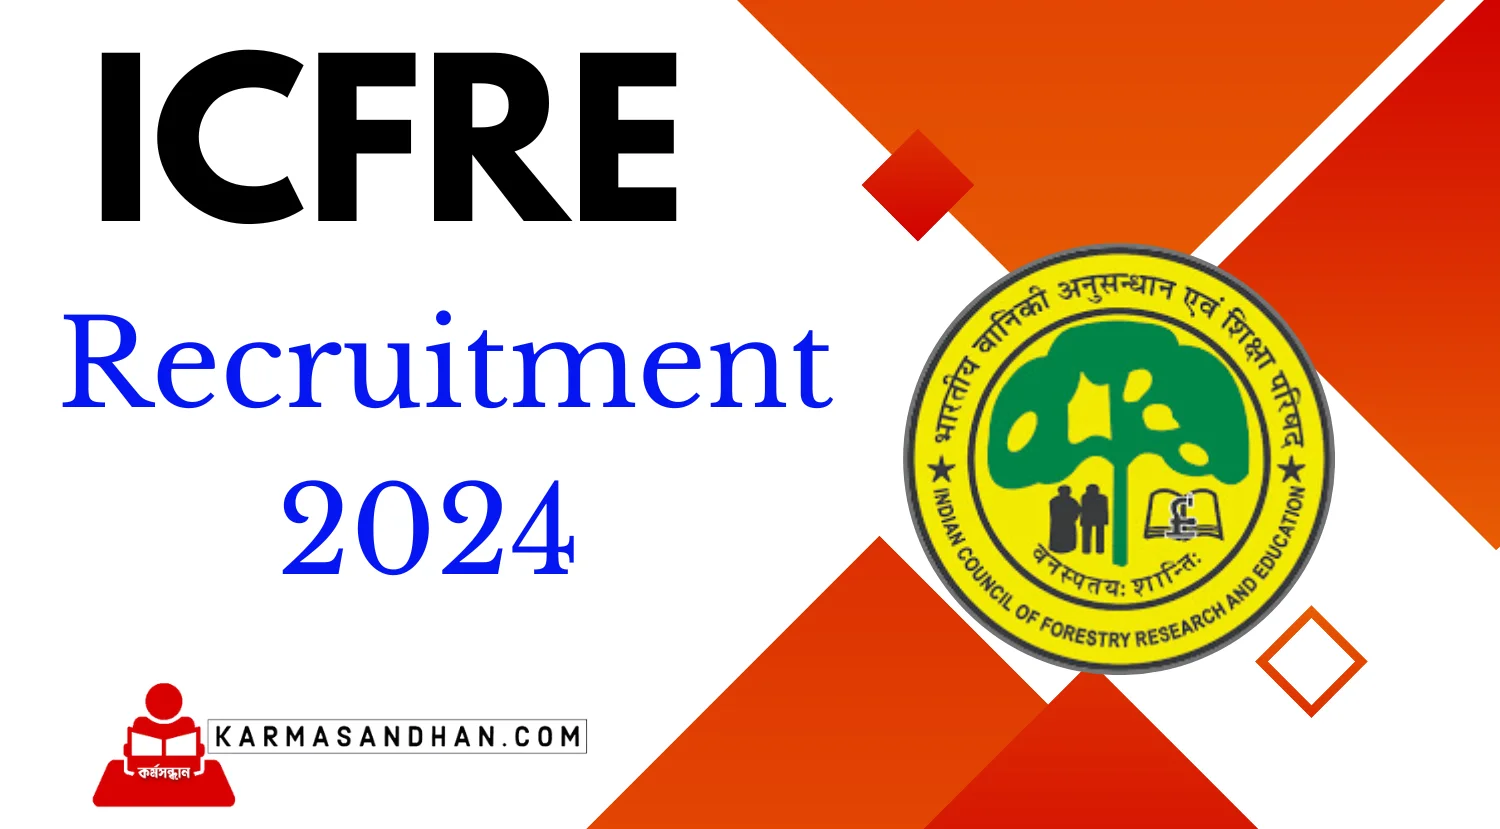 ICFRE Jr Project Consultant and Project Associate Recruitment 2024